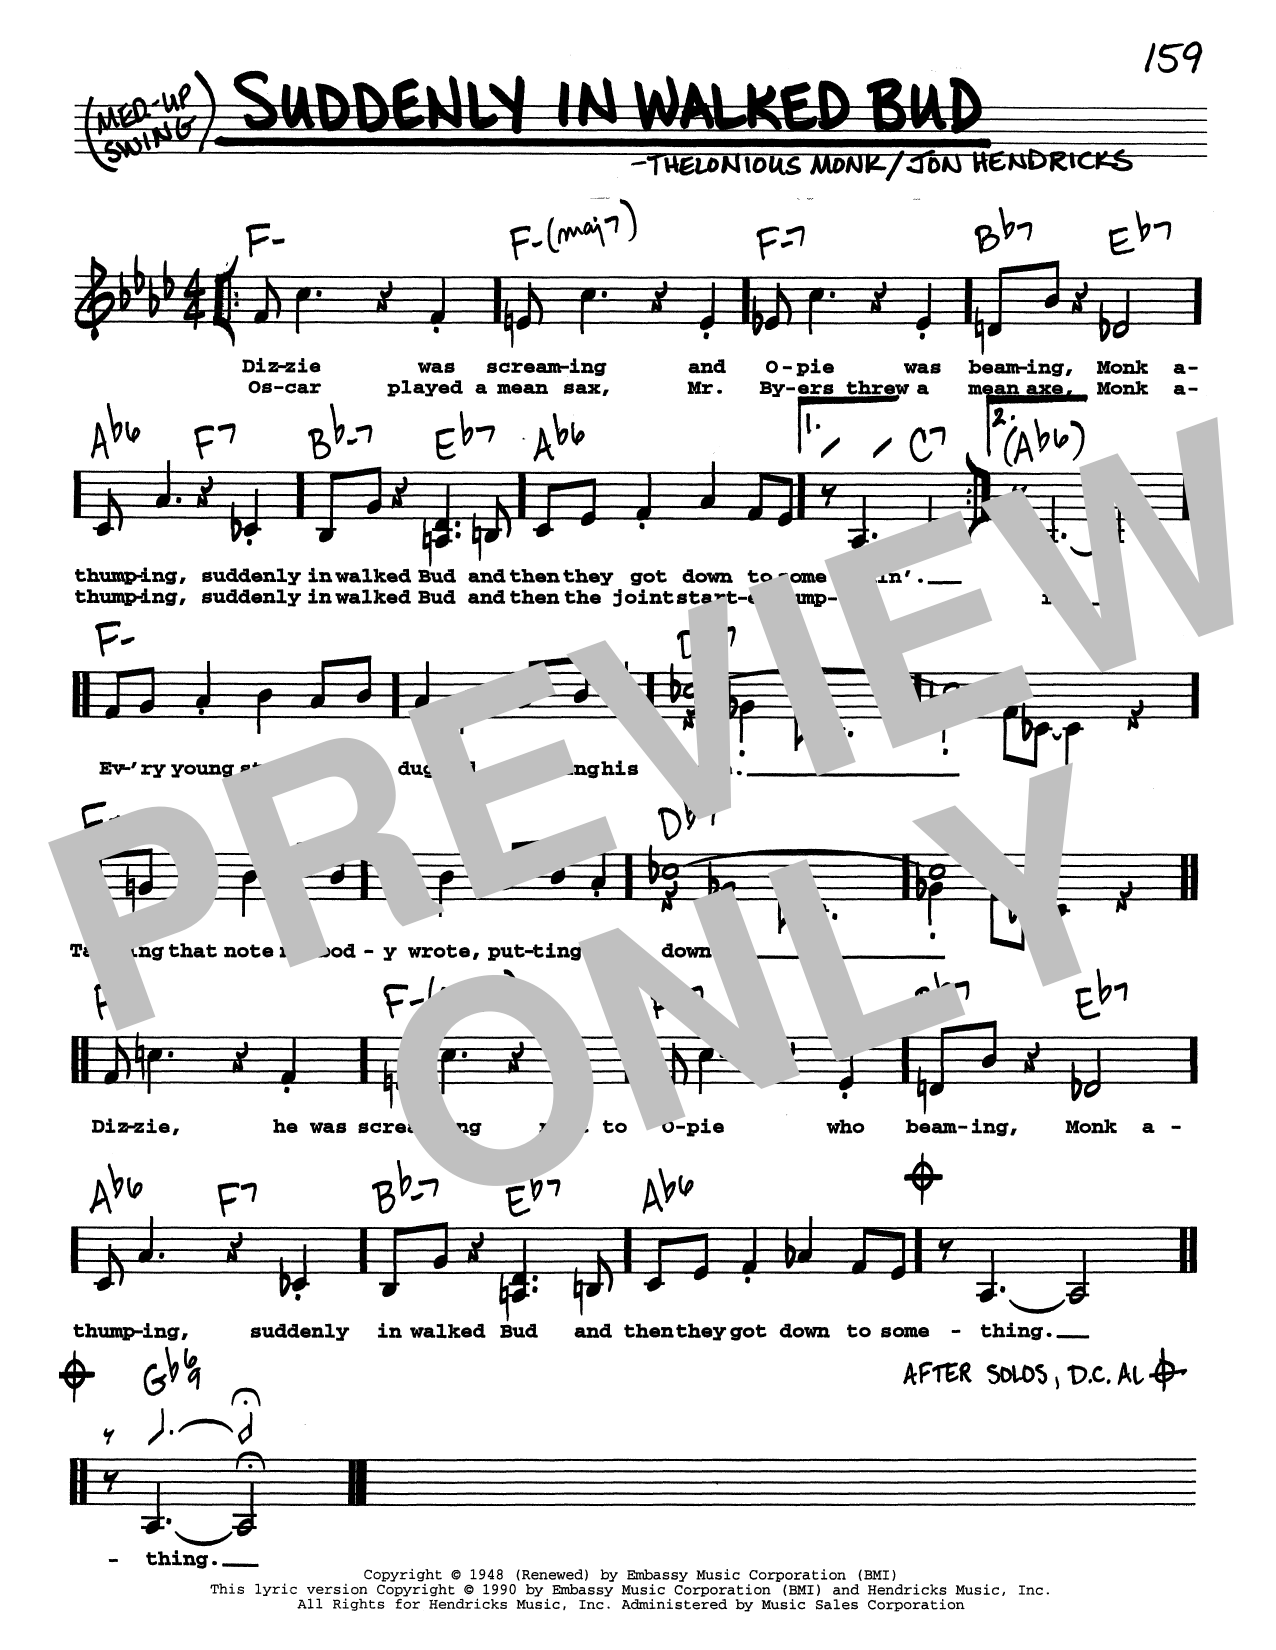 Thelonious Monk In Walked Bud (Low Voice) sheet music notes printable PDF score